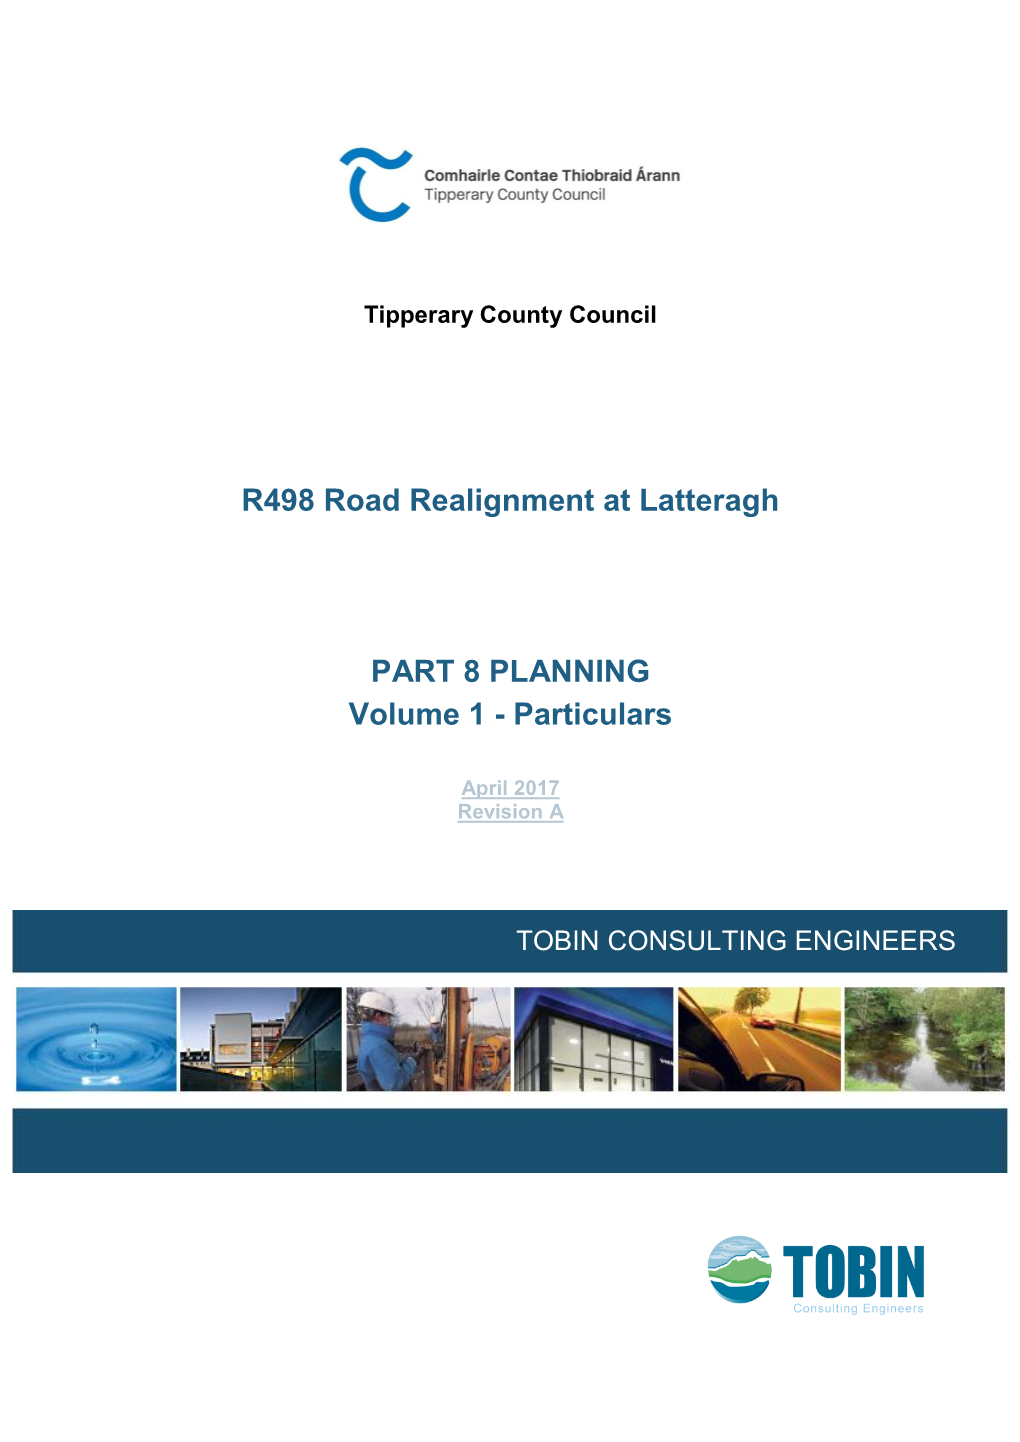 R498 Road Realignment at Latteragh PART 8 PLANNING Volume 1